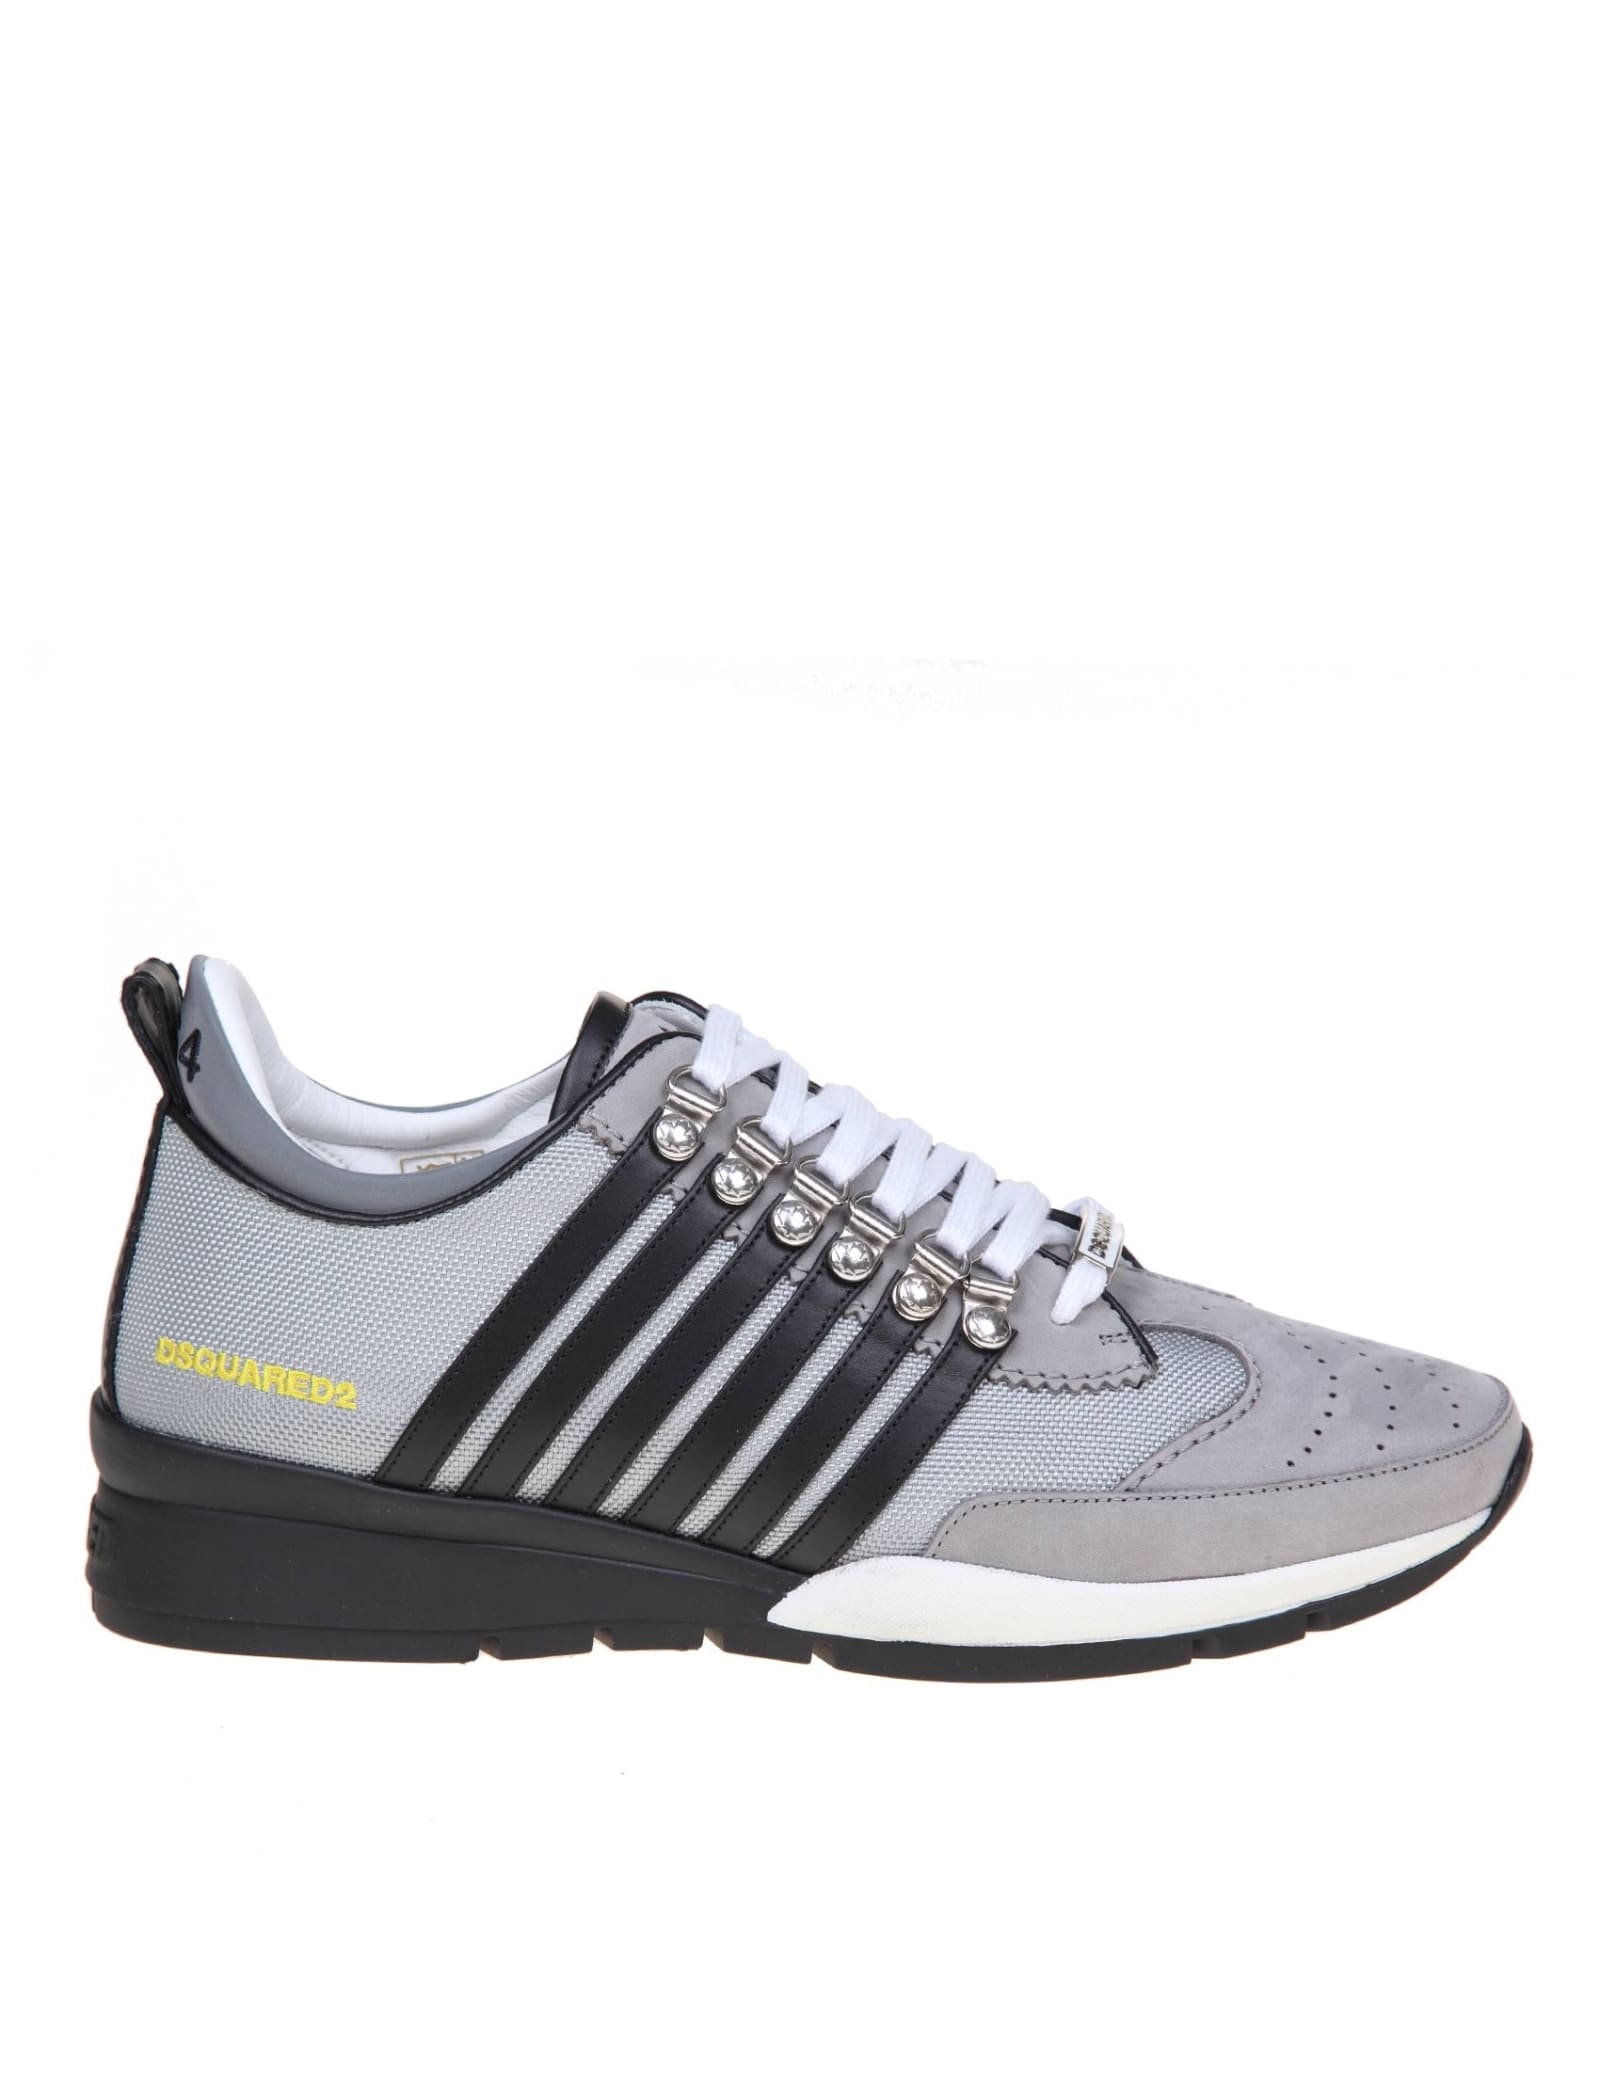 Shop Dsquared2 Legendary Sneakers In Gray And Black Suede In Gray / Black